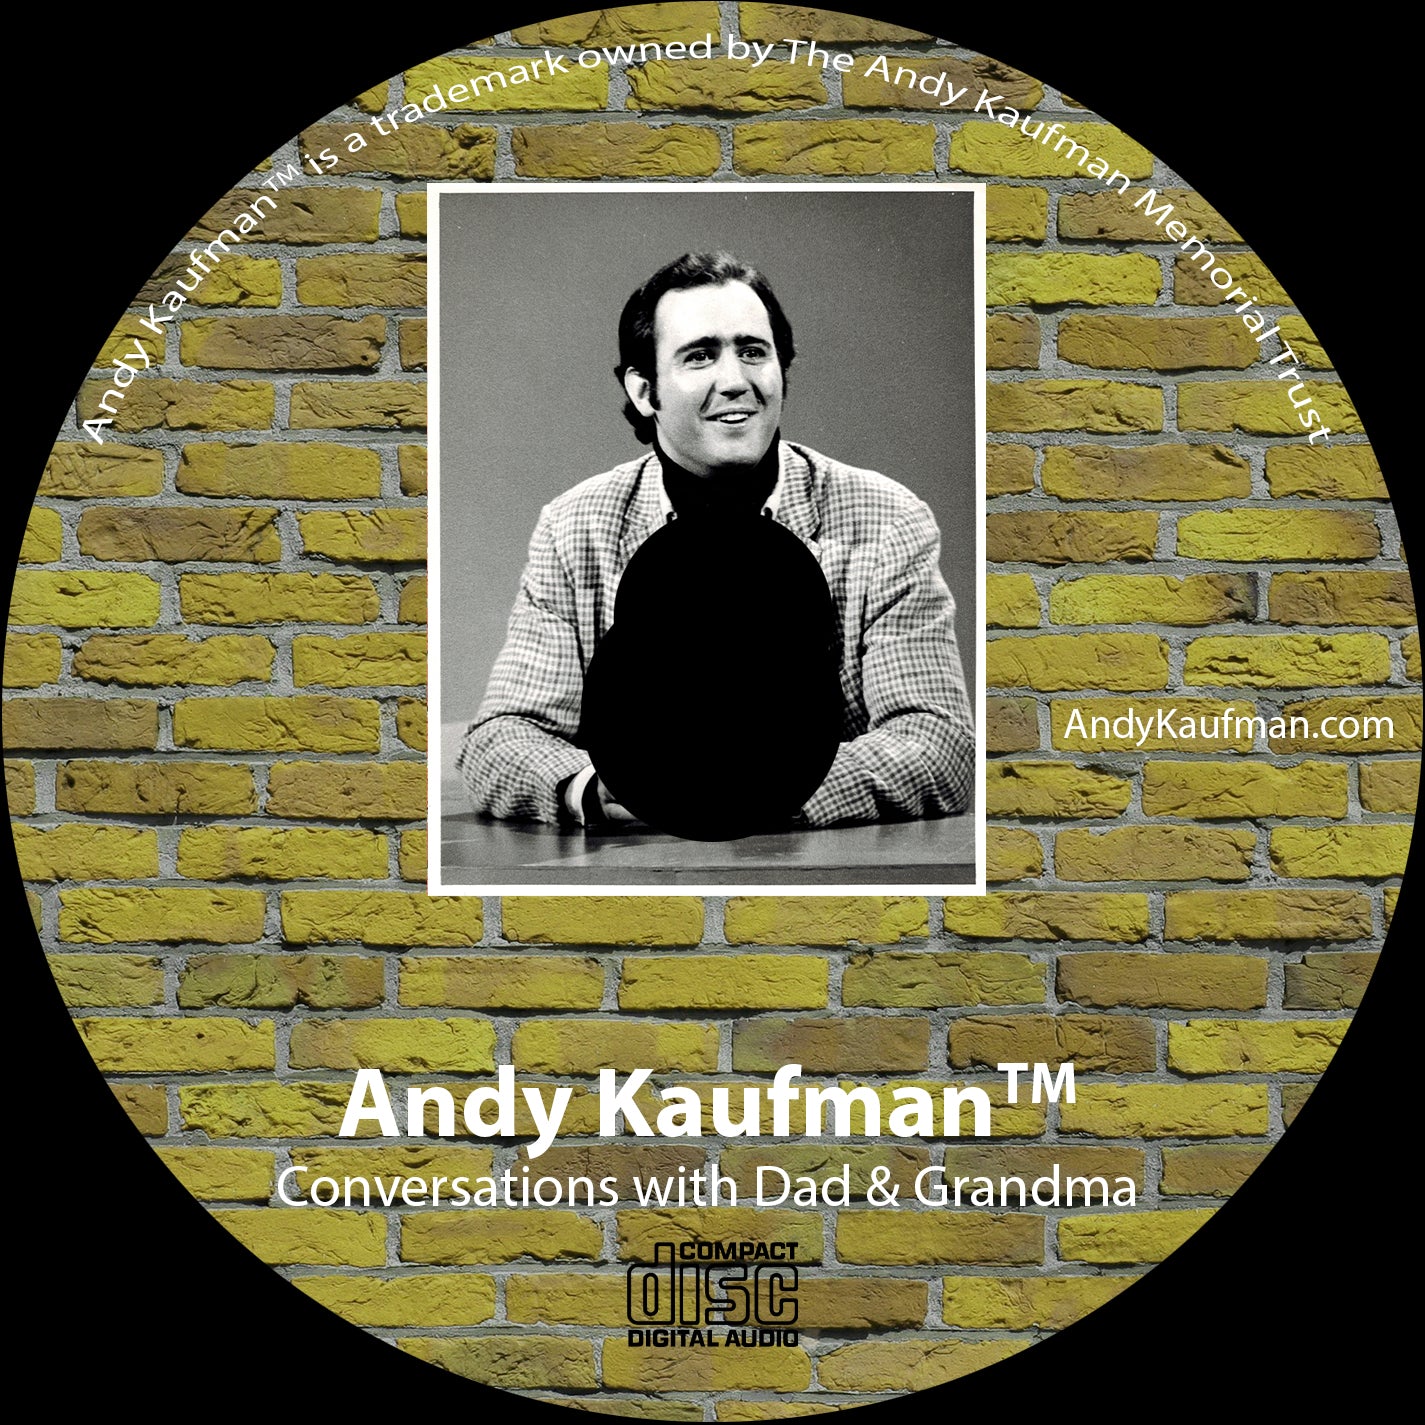 Andy Kaufman™ - Conversations with Dad and Grandma (CD)